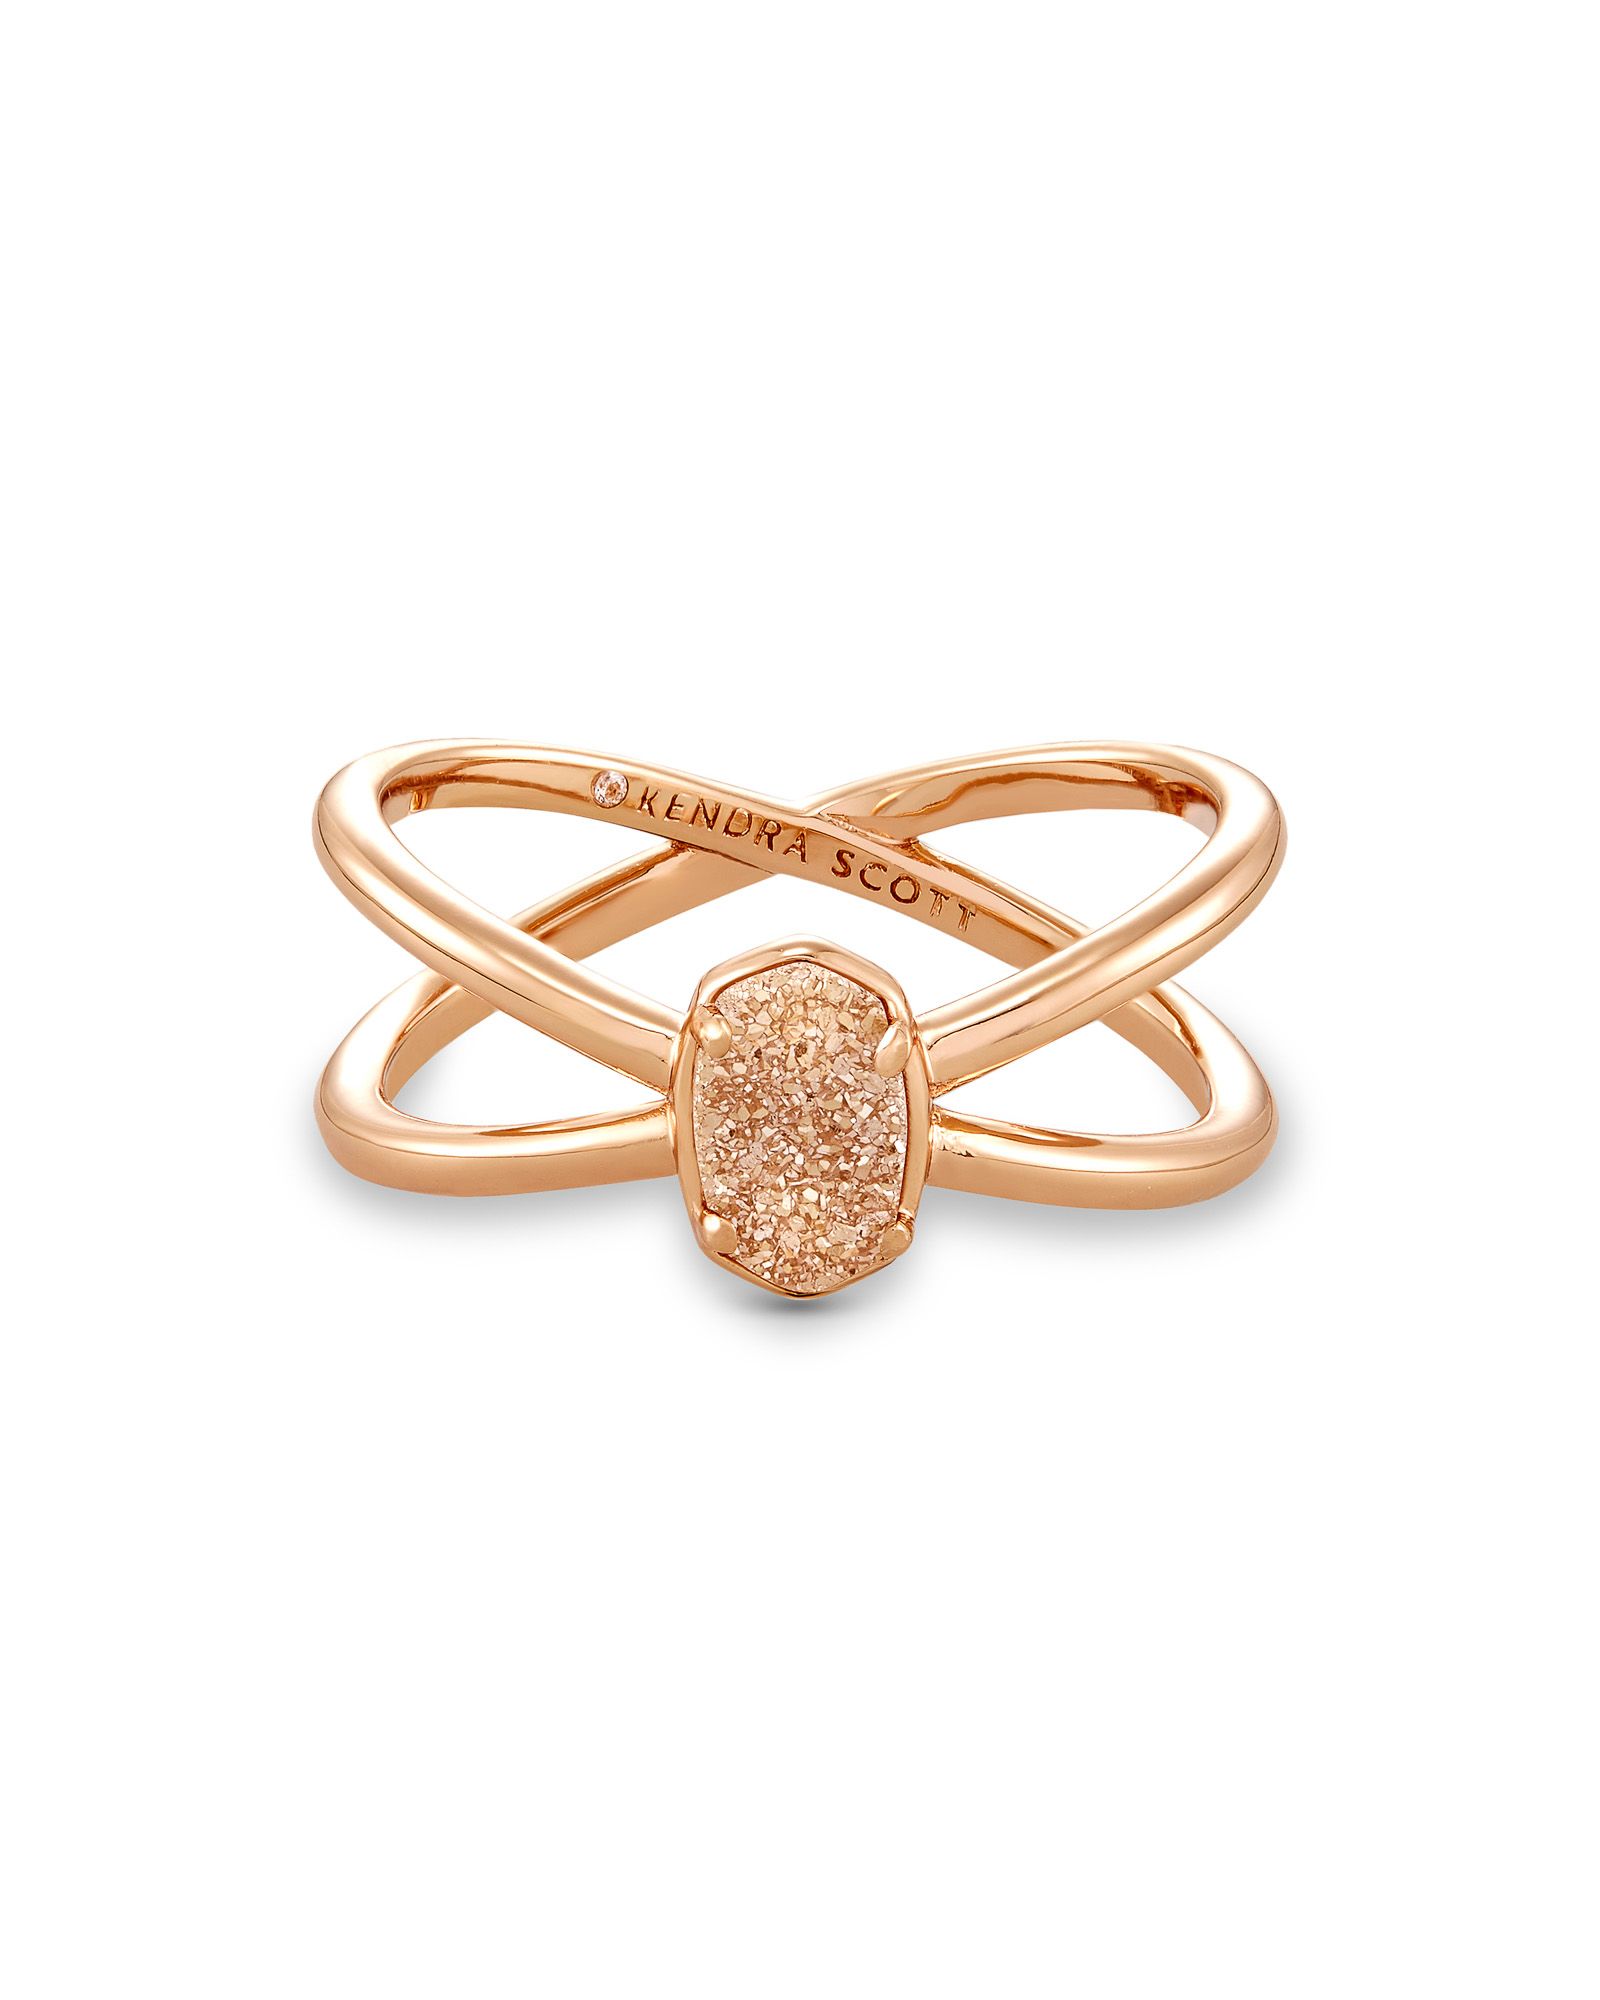 Emilie Rose Gold Double Band Ring in Sand Drusy | Kendra Scott